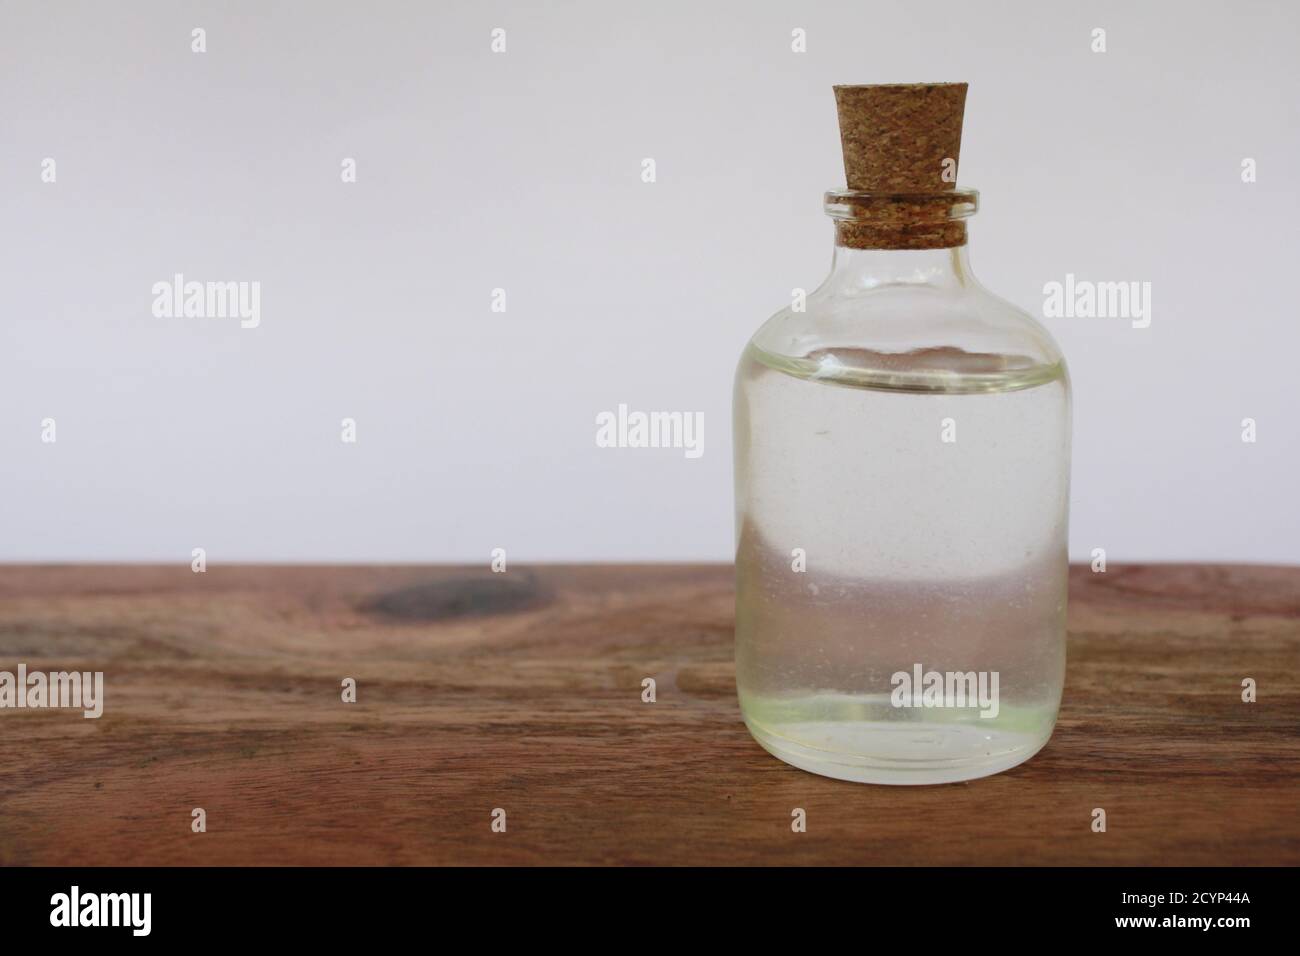 Transparent glass bottles with Essential Oils Stock Photo